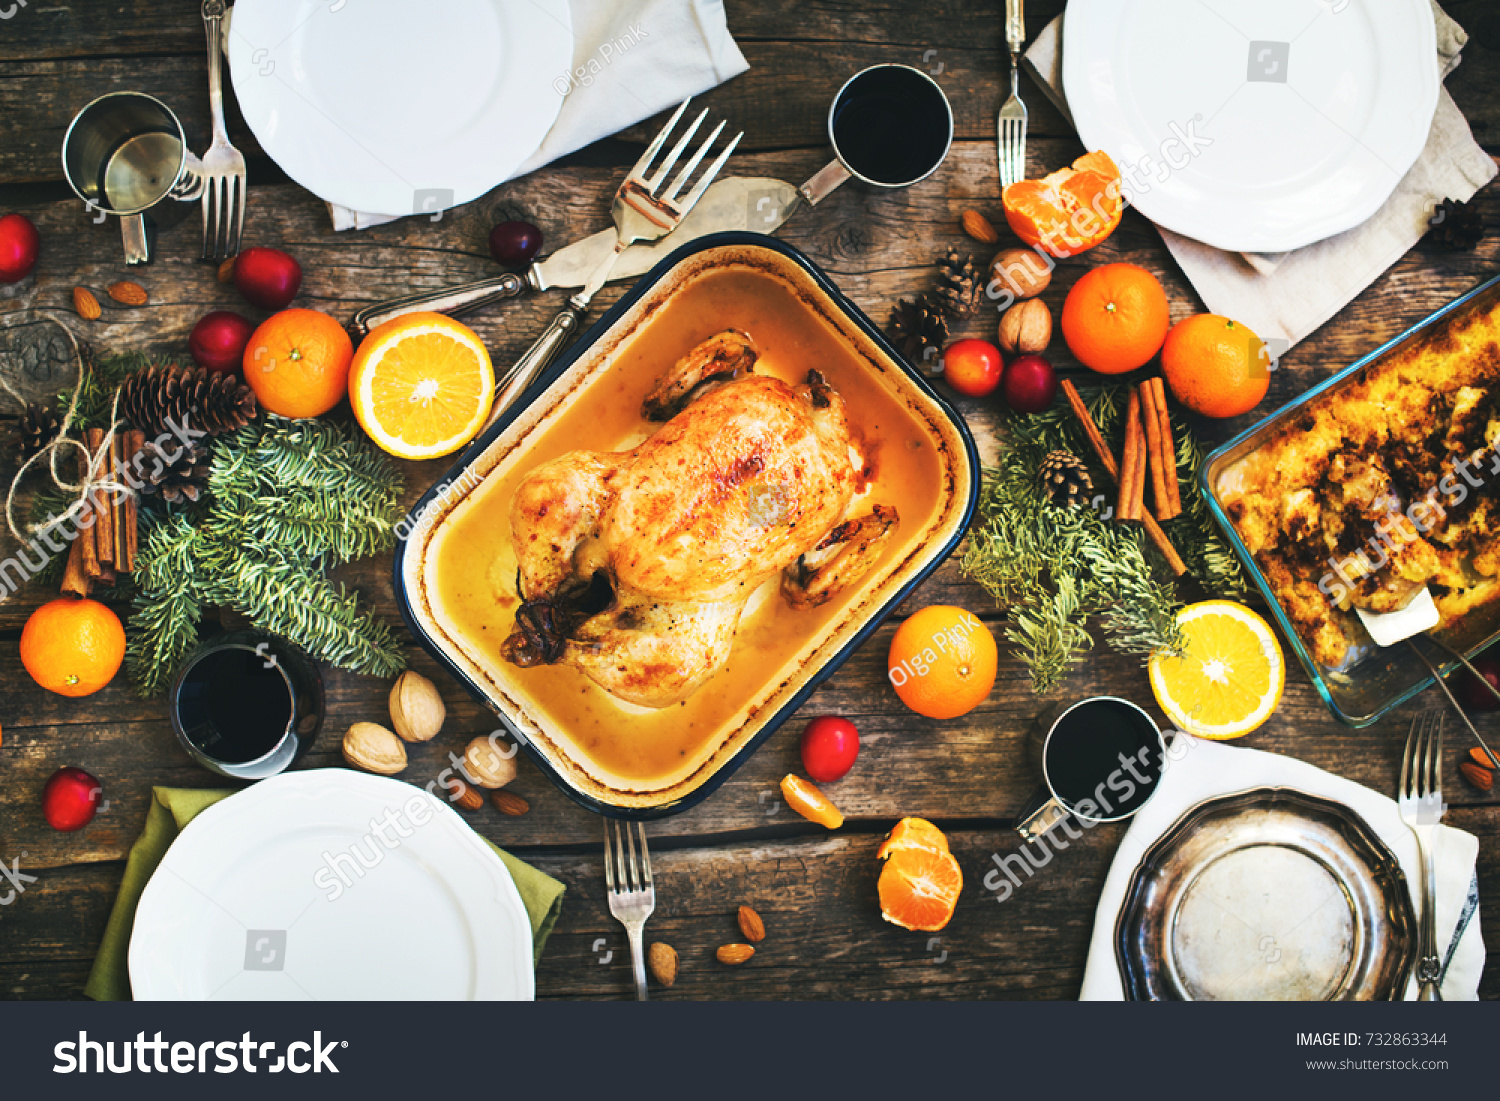 Baked Whole Chicken for Christmas or Thanksgiving Day Table with Fruits Seasonal Spices Metal Pallet Wooden Table Top View Main Course #732863344